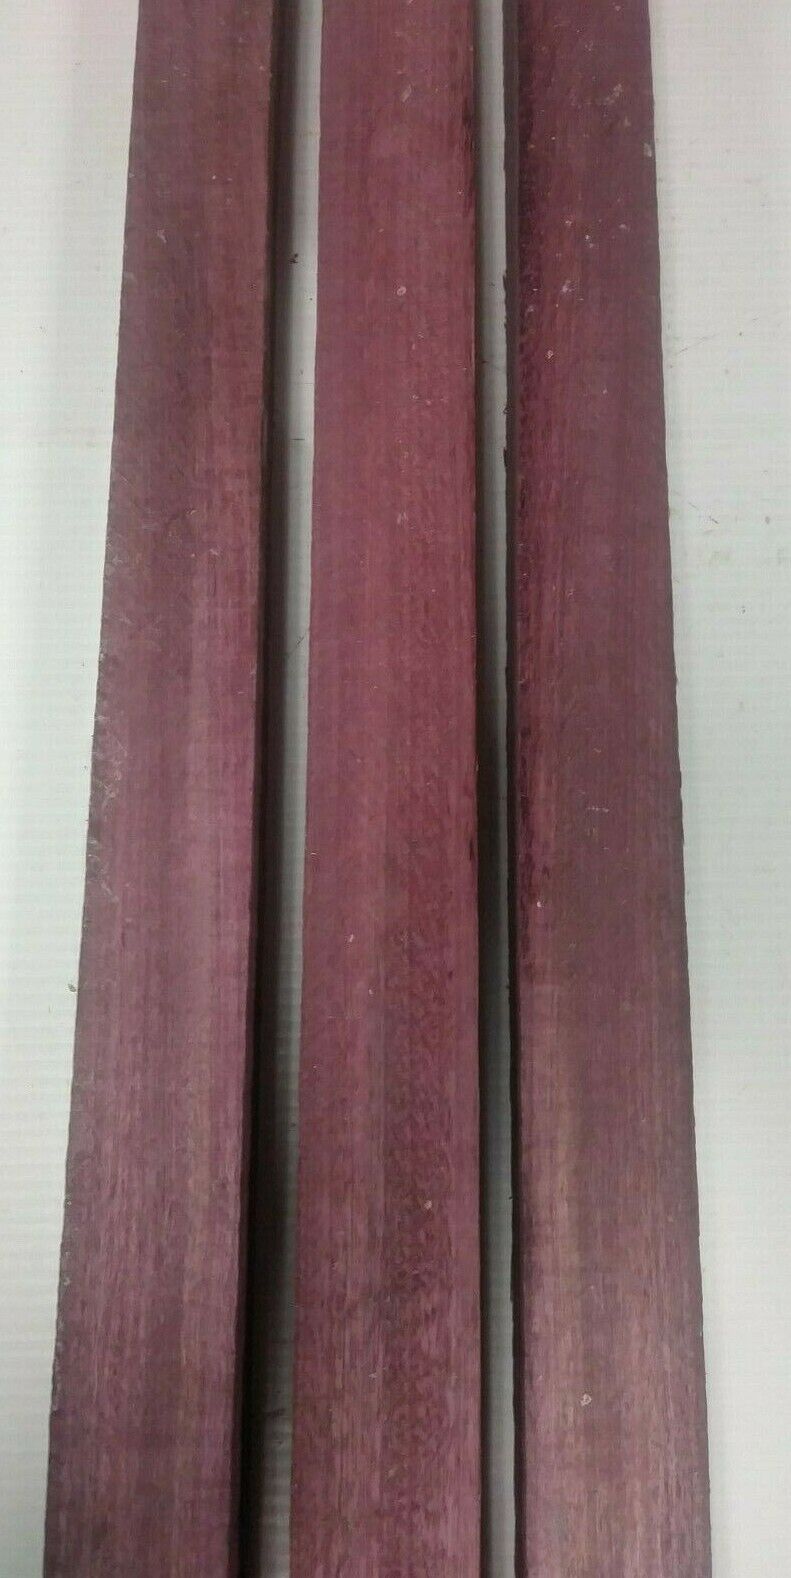 Pack of 3, Purpleheart Thin Dimensional Lumber Board Wood Blank 3/4" x 2" x 16" EXOTIC WOOD ZONE Does Not Apply